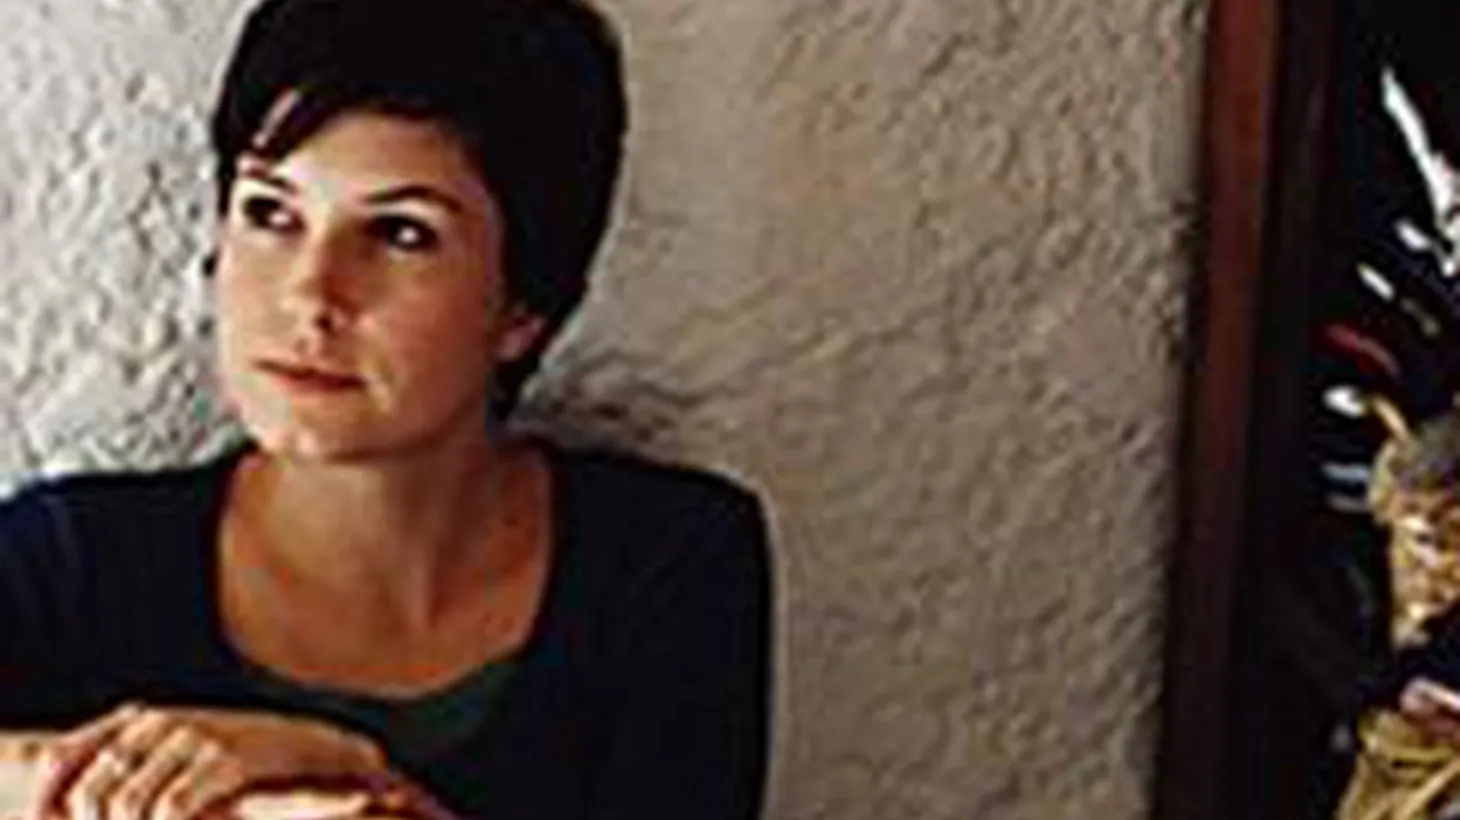 Singer and pianist Missy Higgins returns with songs from her latest release, On a Clear Night, to Morning Becomes Eclectic at 11:15am.